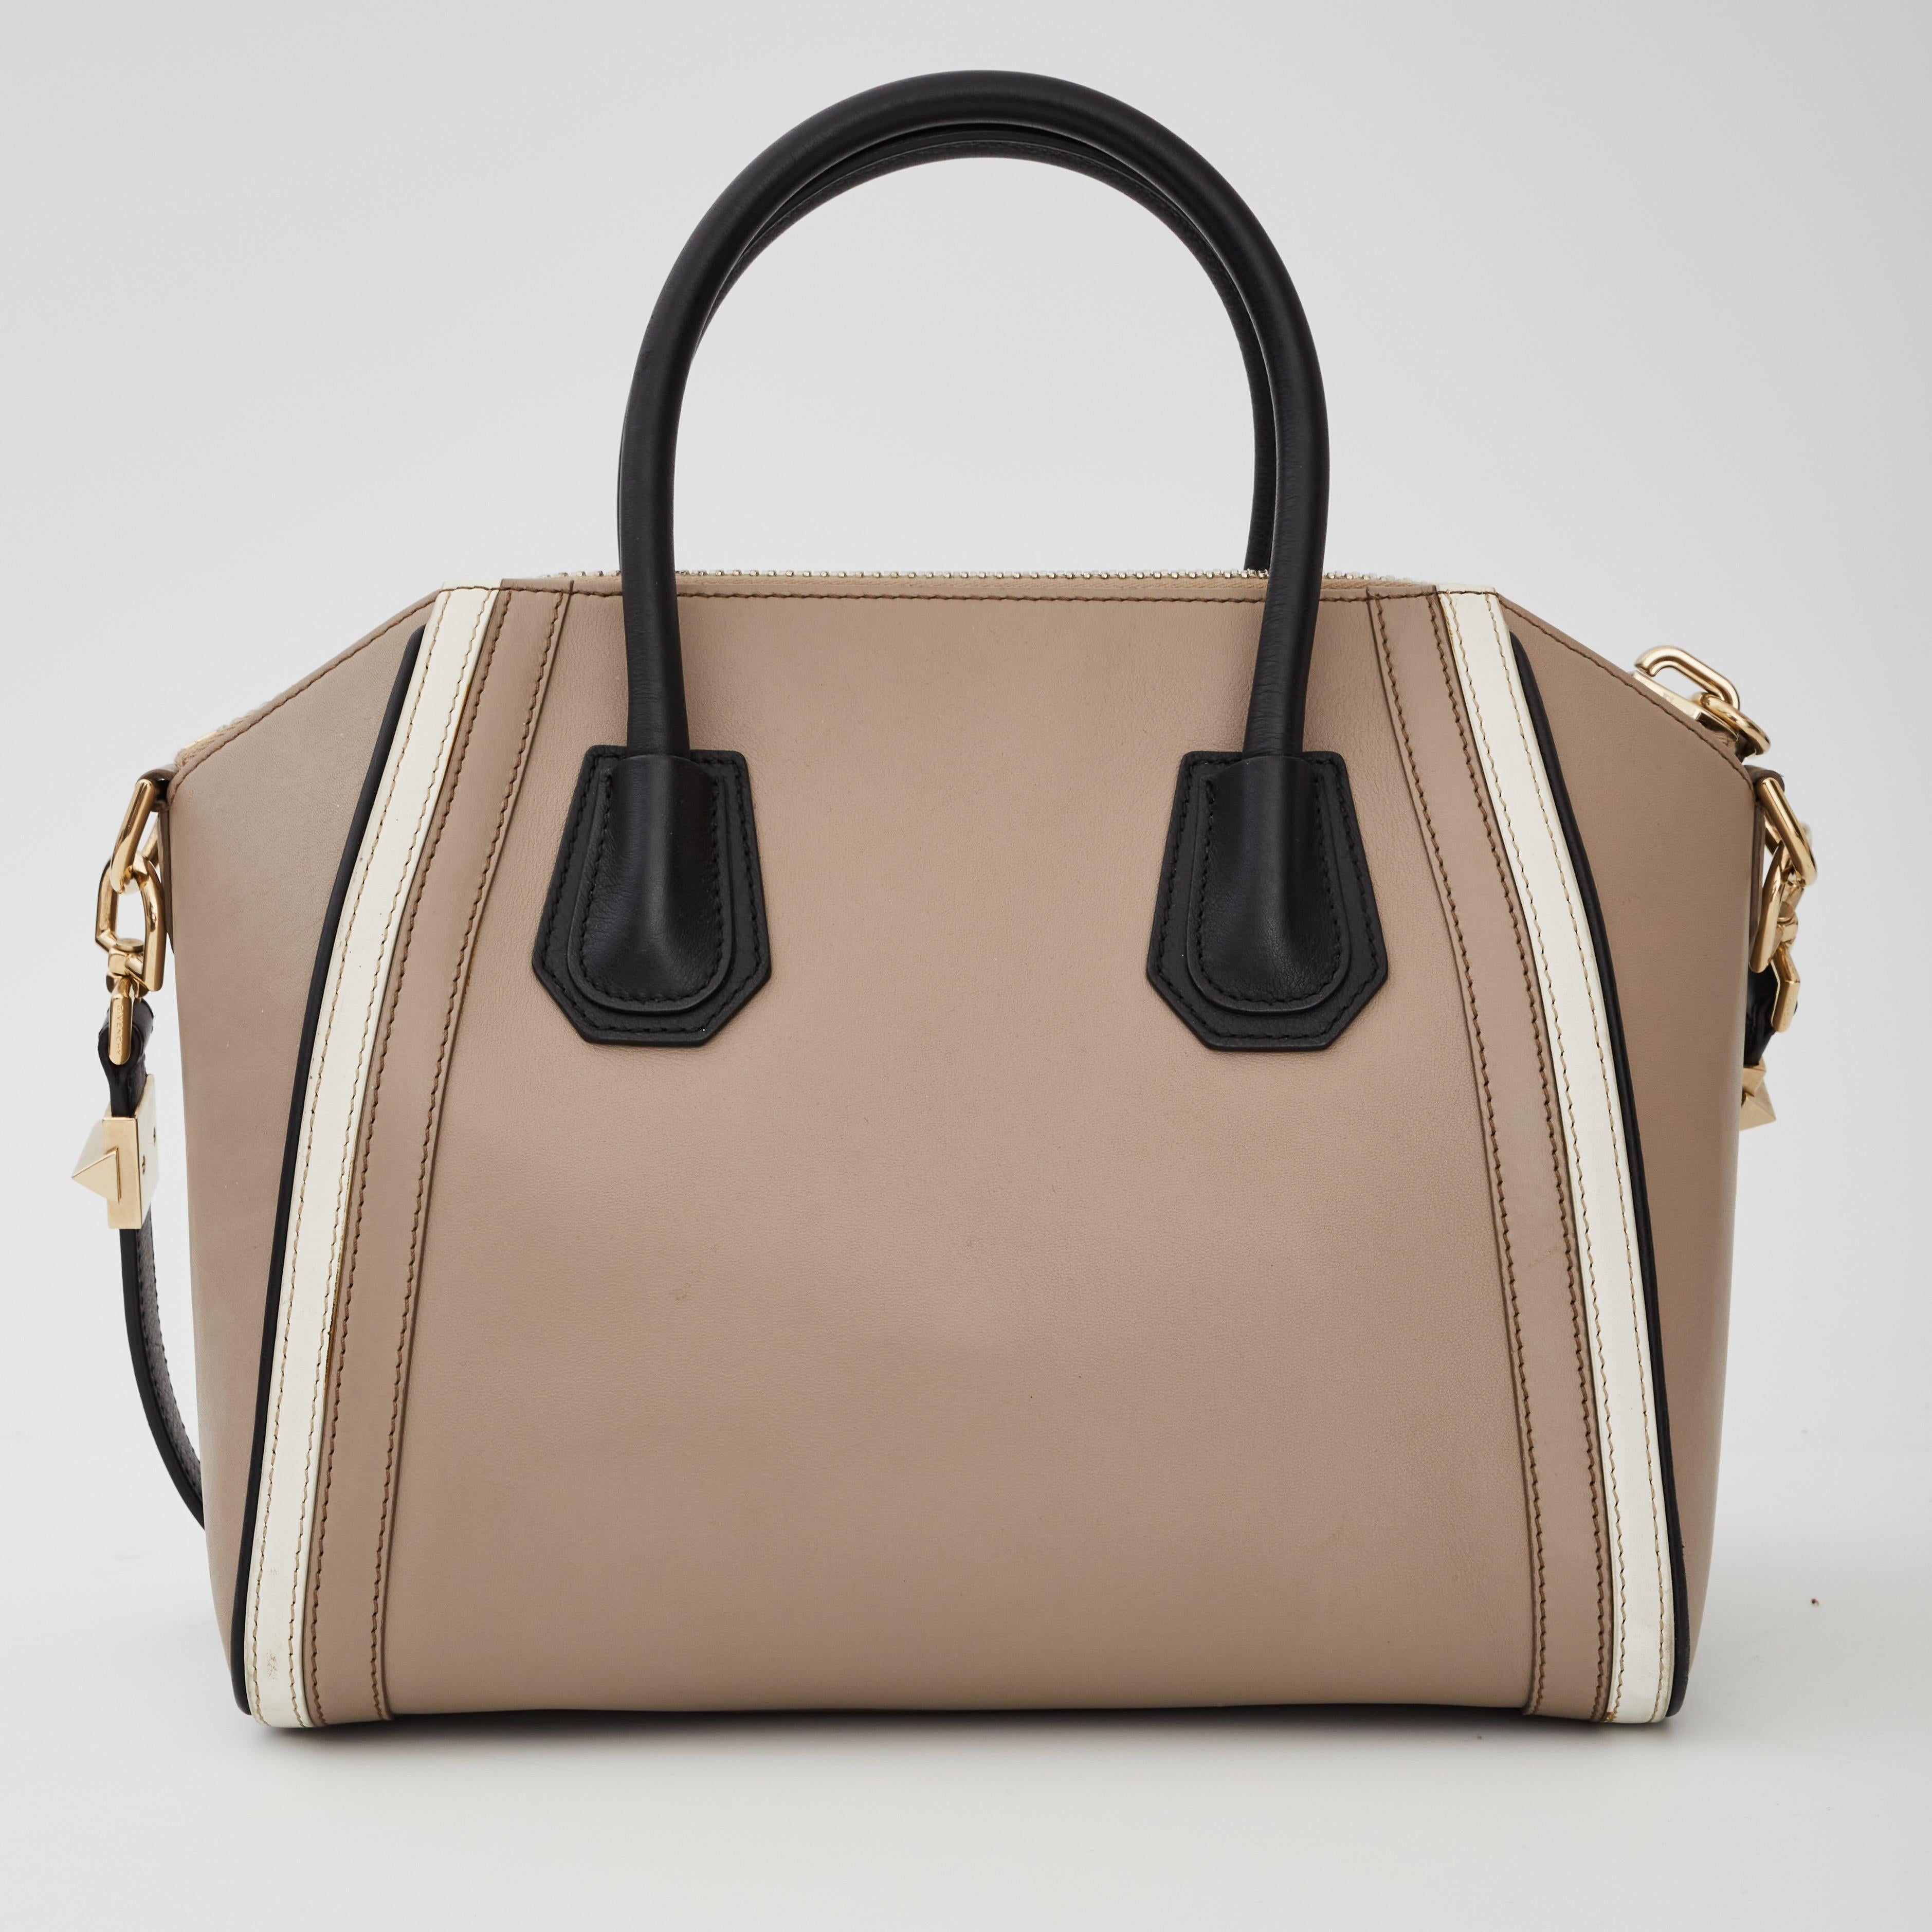 This tote is made of luxurious smooth taupe calfskin leather with white and black leather trim. The bag features thin and sturdy rolled leather leather top handles, an optional shoulder strap, gold hardware and expansive sides. The top opens with a